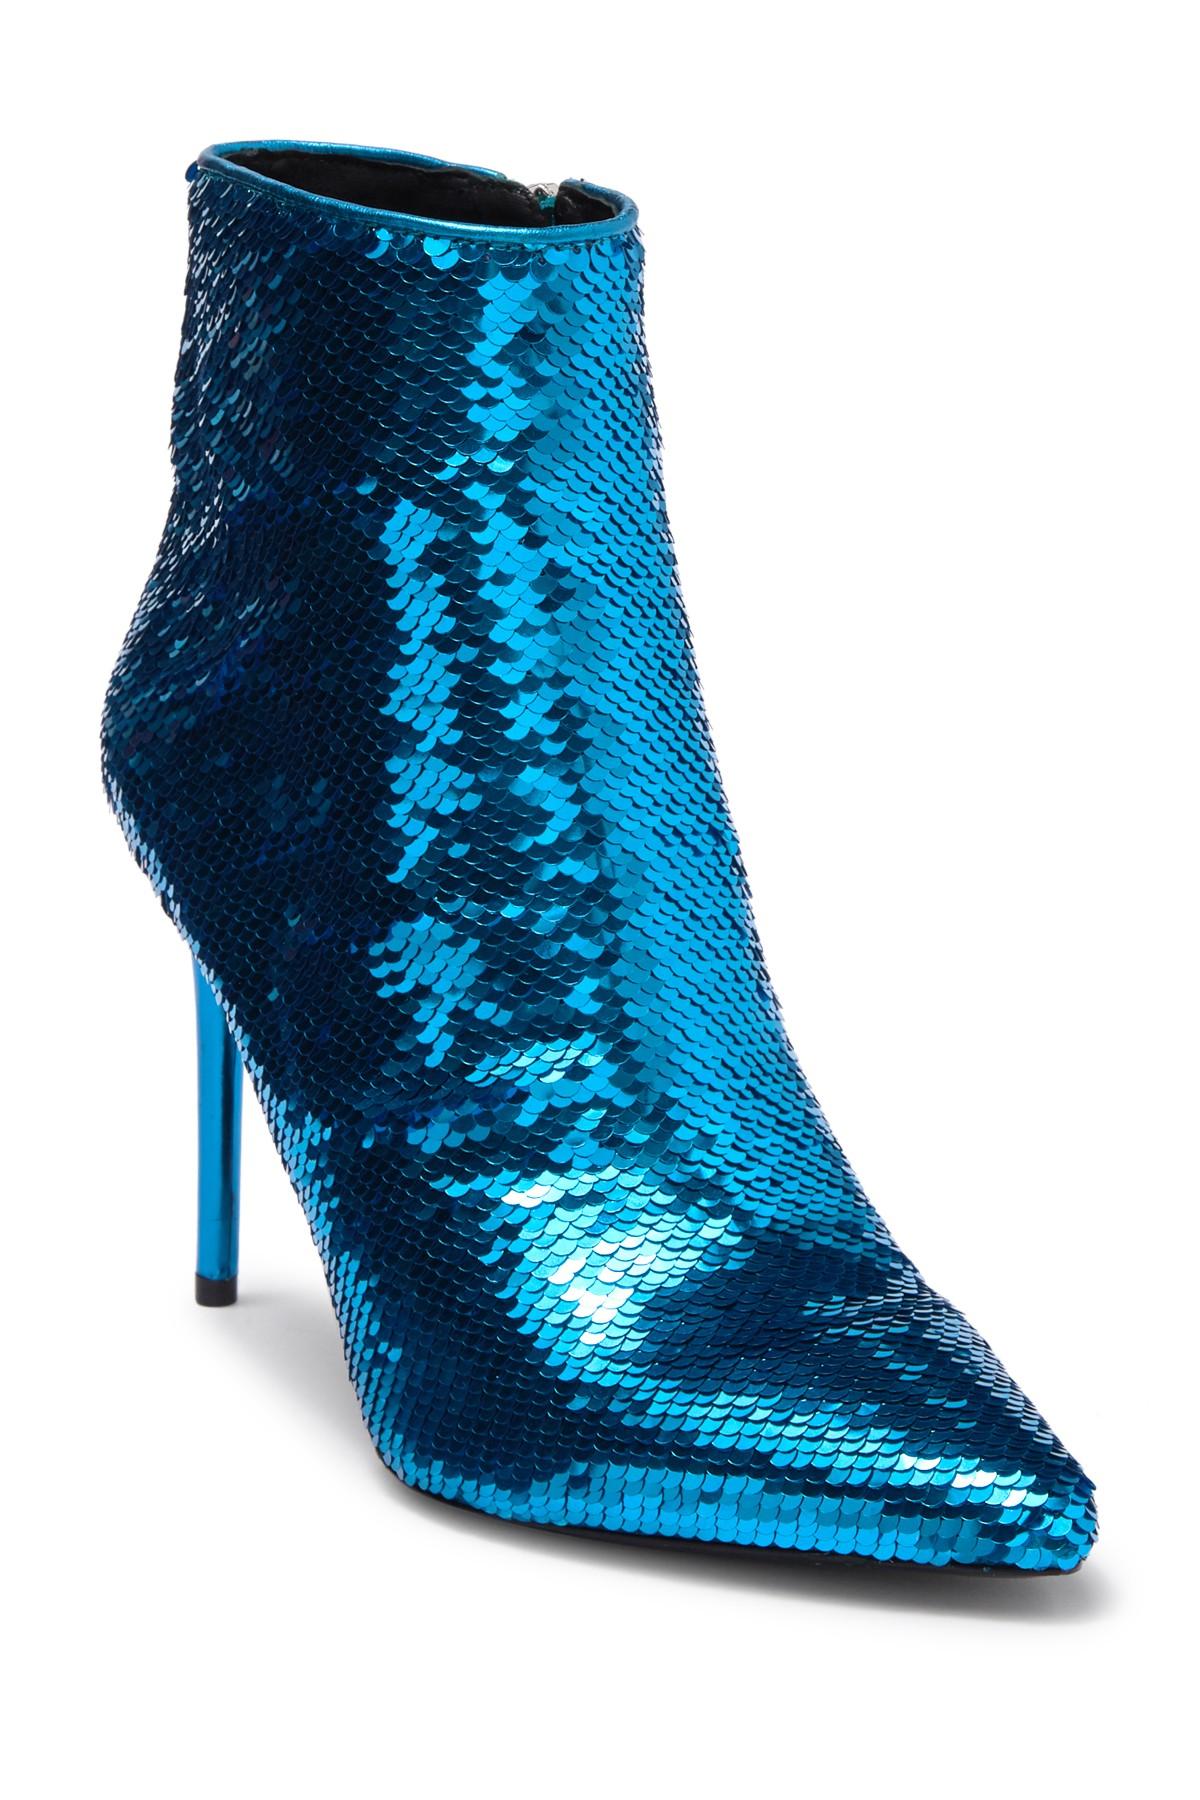 Alice + Olivia Synthetic Celyn Pointed Toe Sequin Bootie in Teal (Blue ...